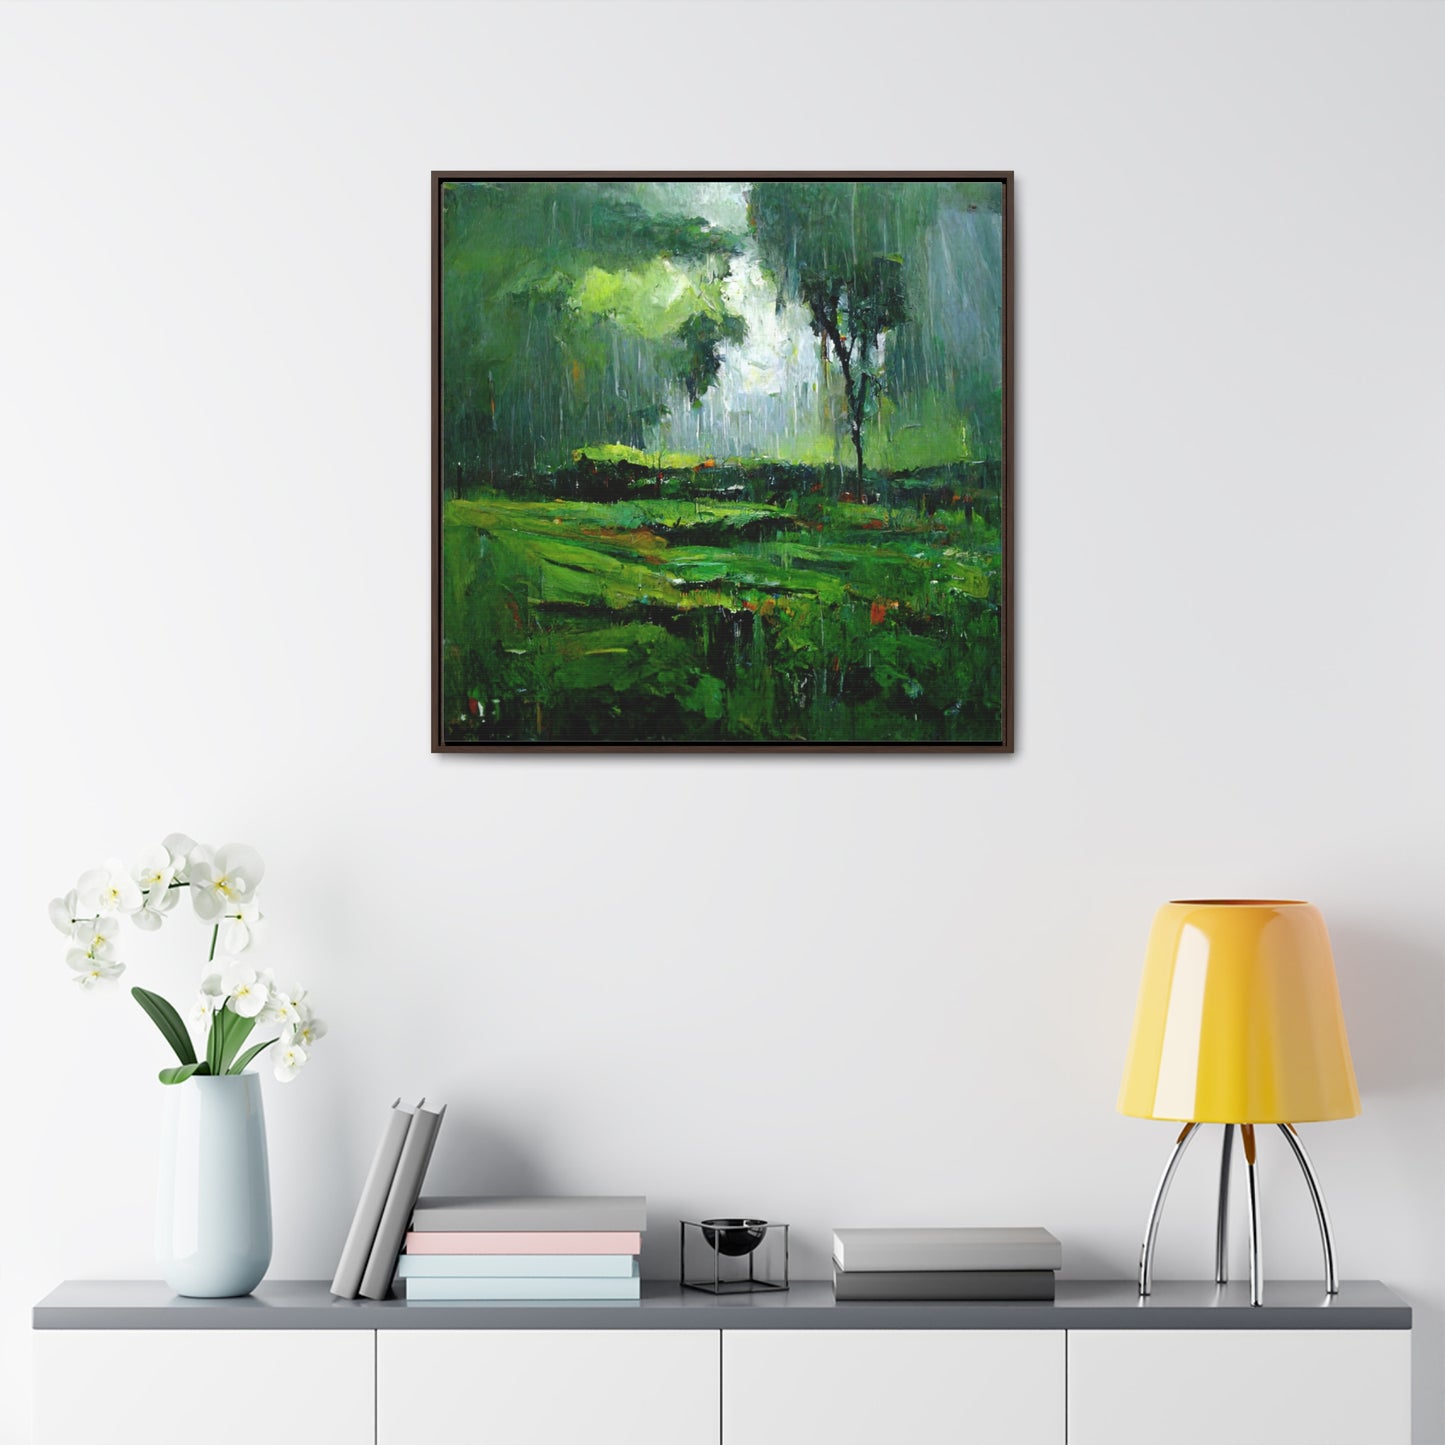 To the Rainy Land, Valentinii, Gallery Canvas Wraps, Square Frame